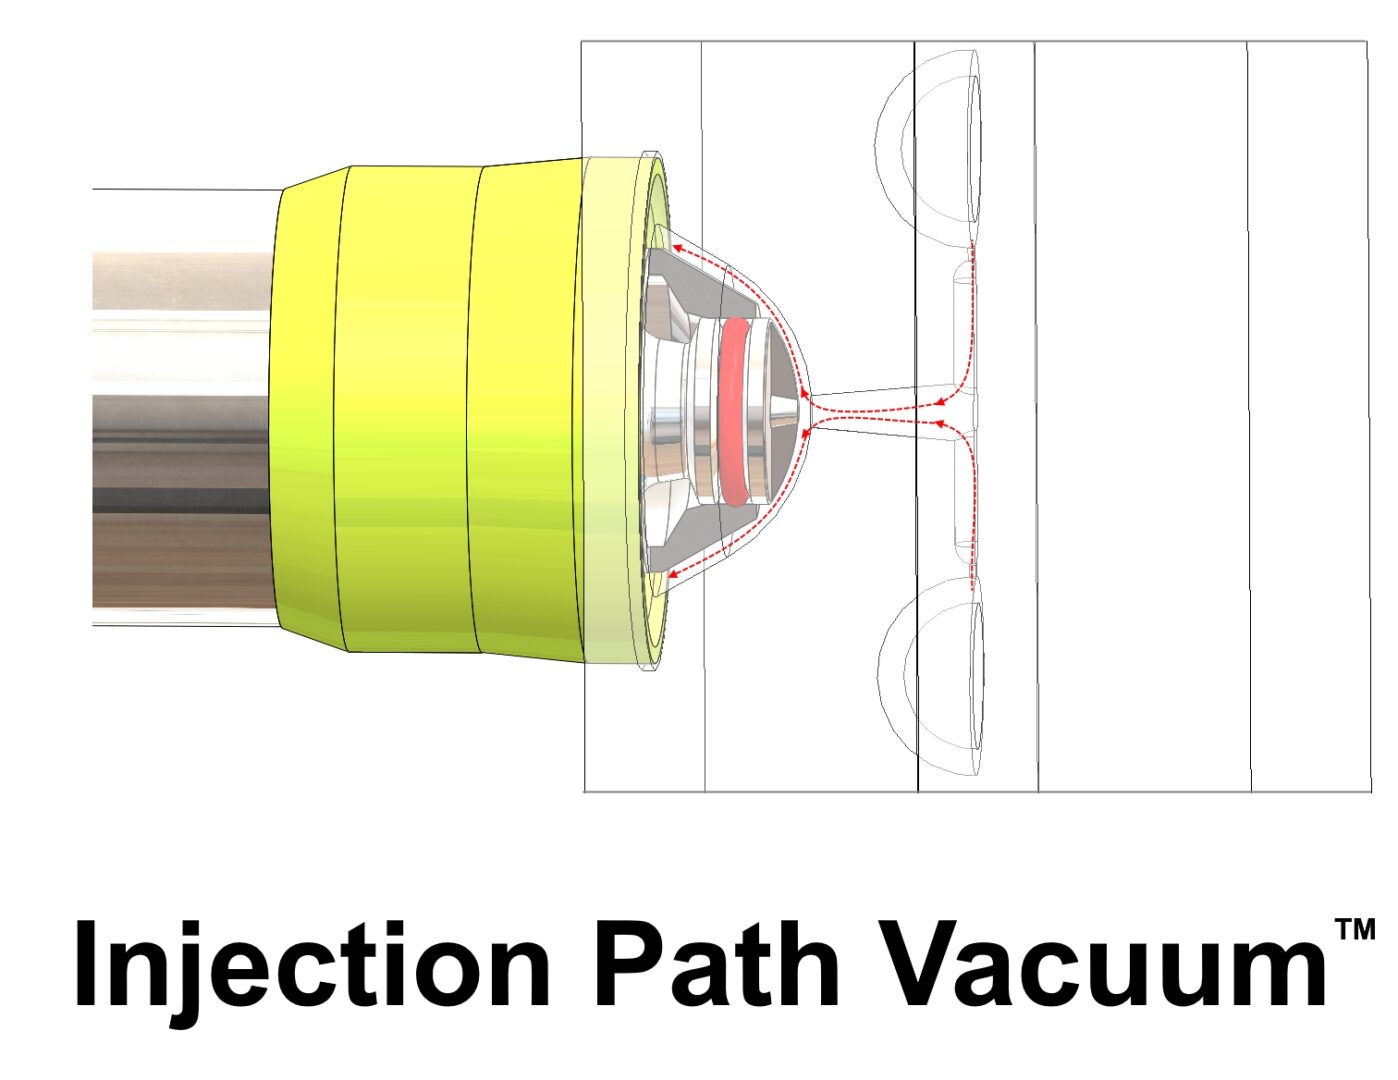 GALLERY - INJECTION PATH VACUUM